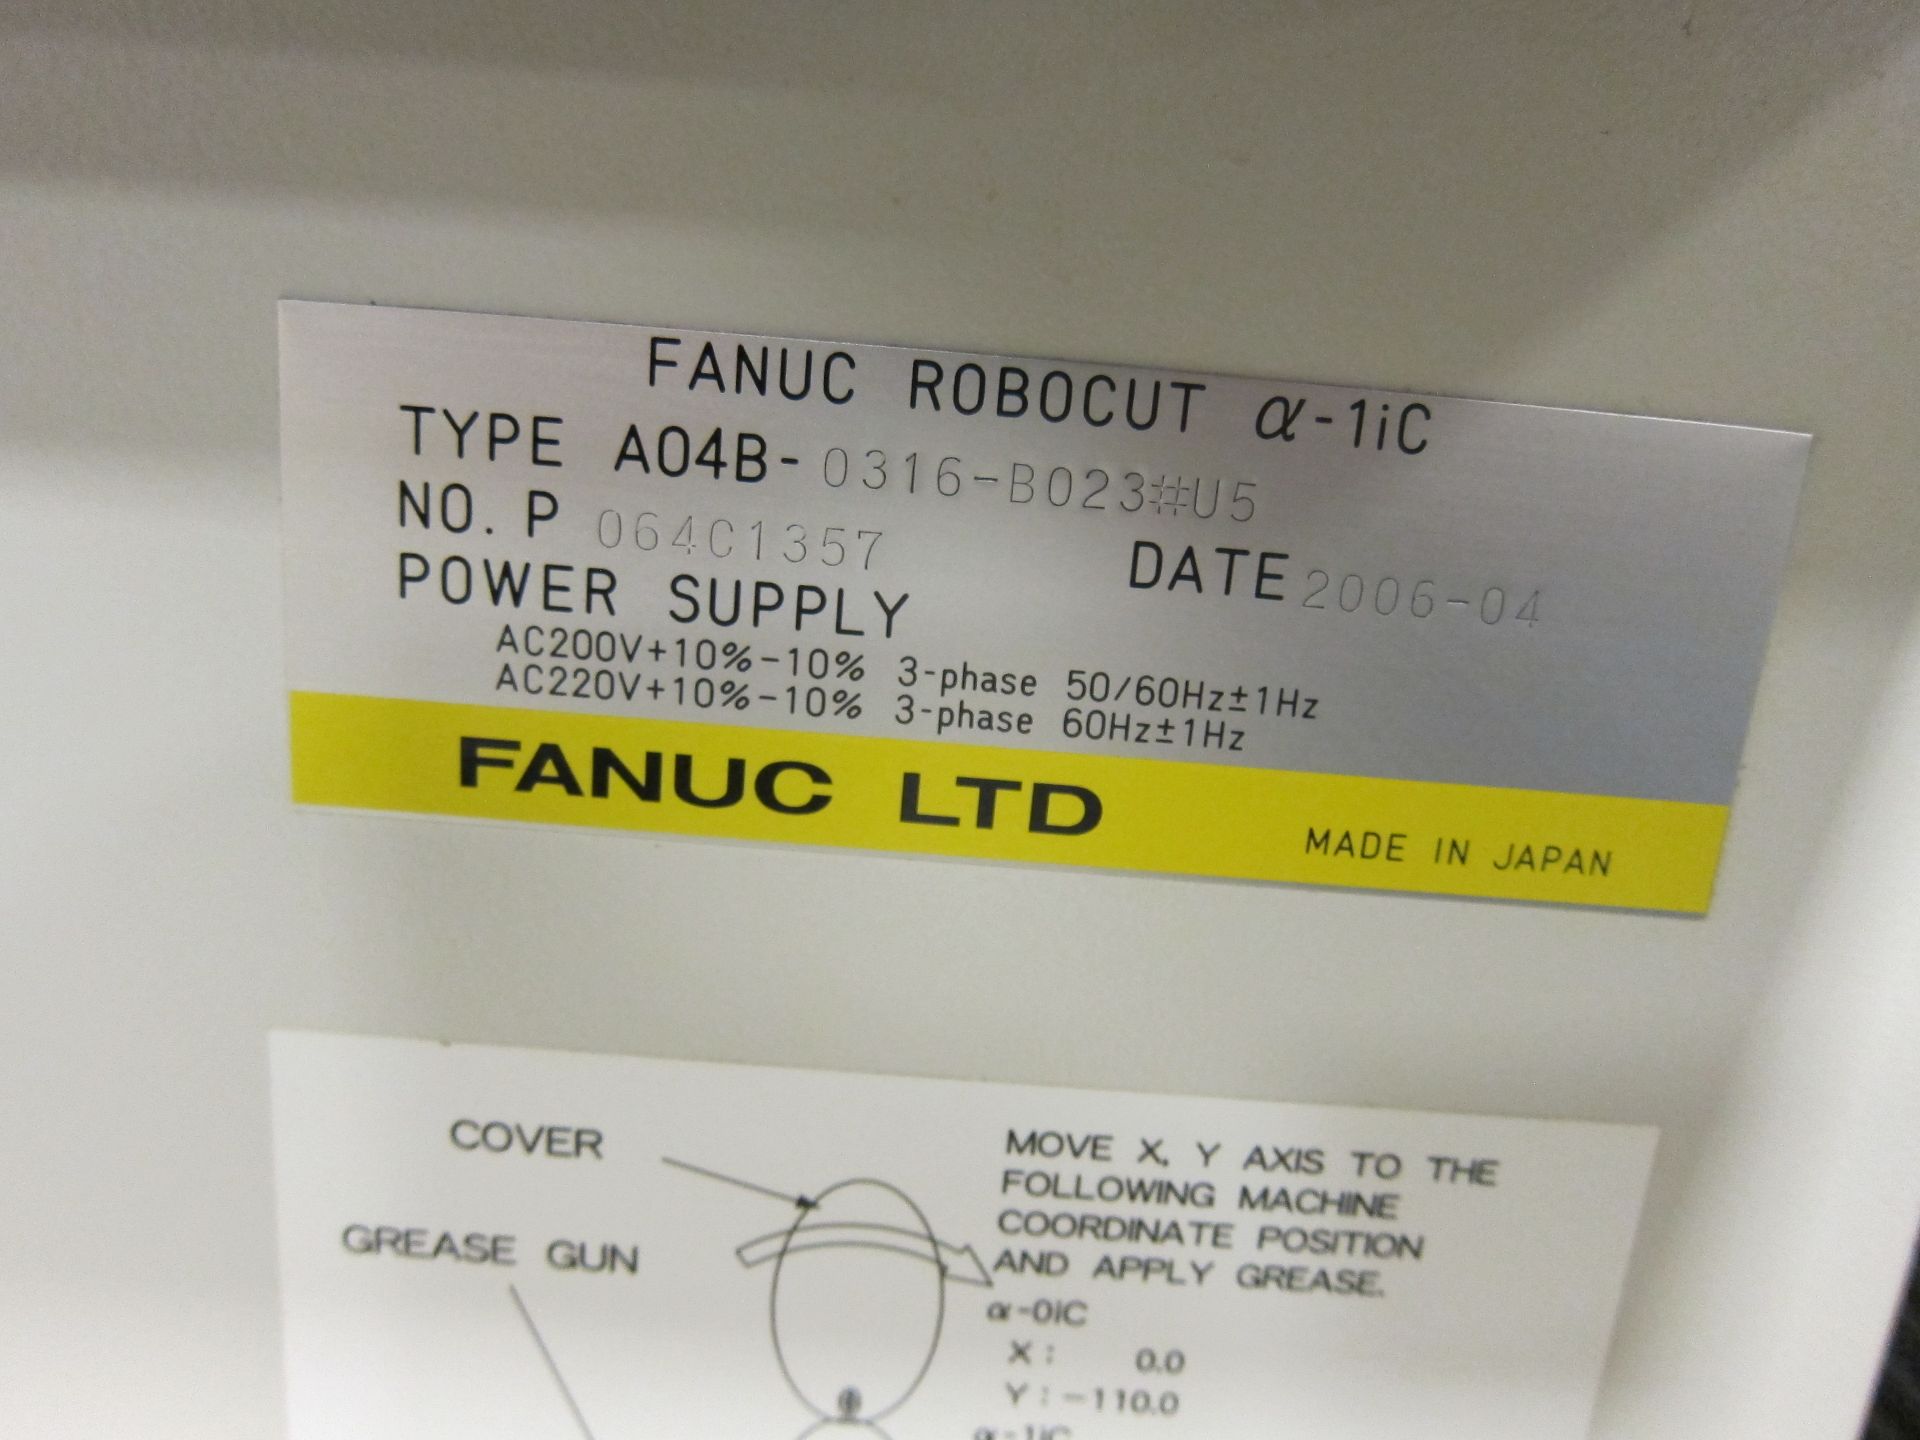 FANUC ROBOCUT A-1IC FANUC 180IS-W CONTROL, 22'' X 15'' X 12'' TRAVEL, AWT, SUBMERGED CUTTING, - Image 7 of 7